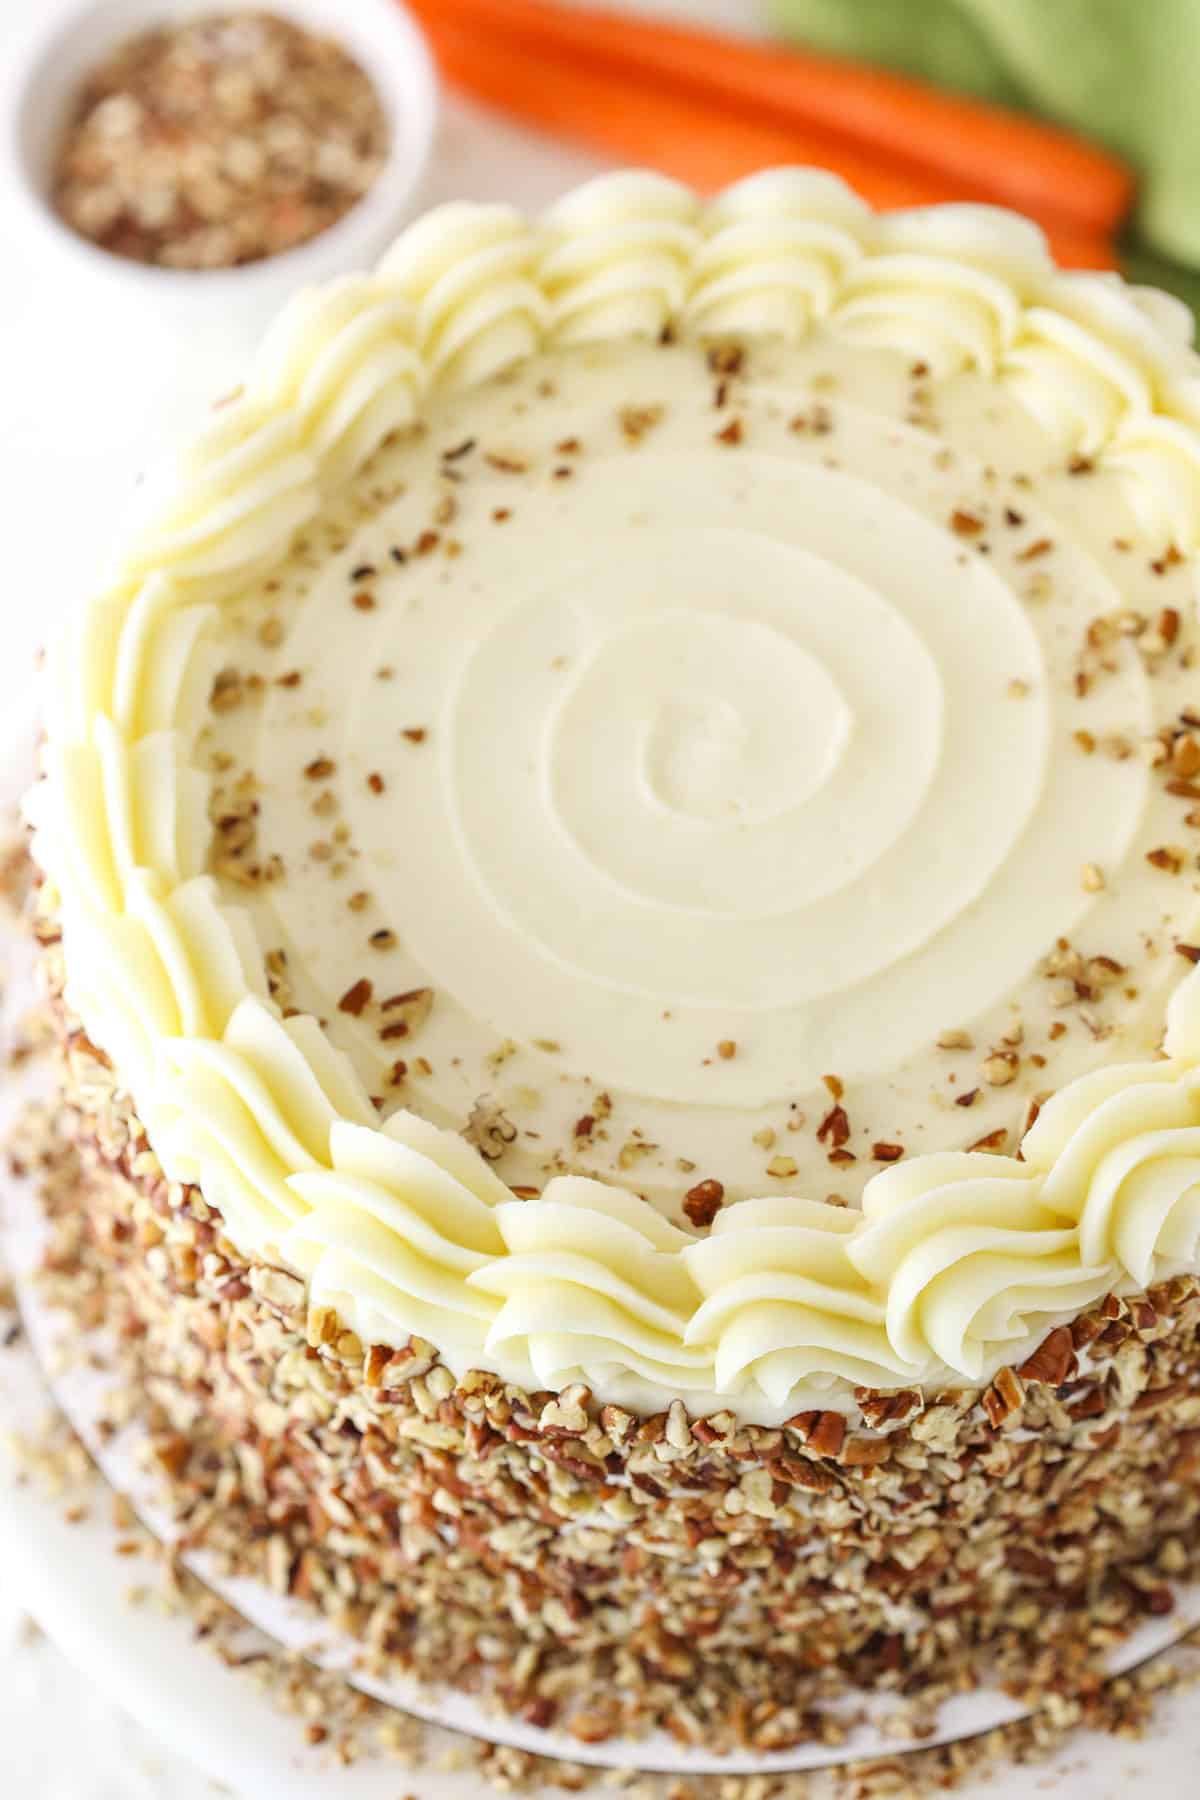 Overhead view of a full Carrot Cake on a white cake stand